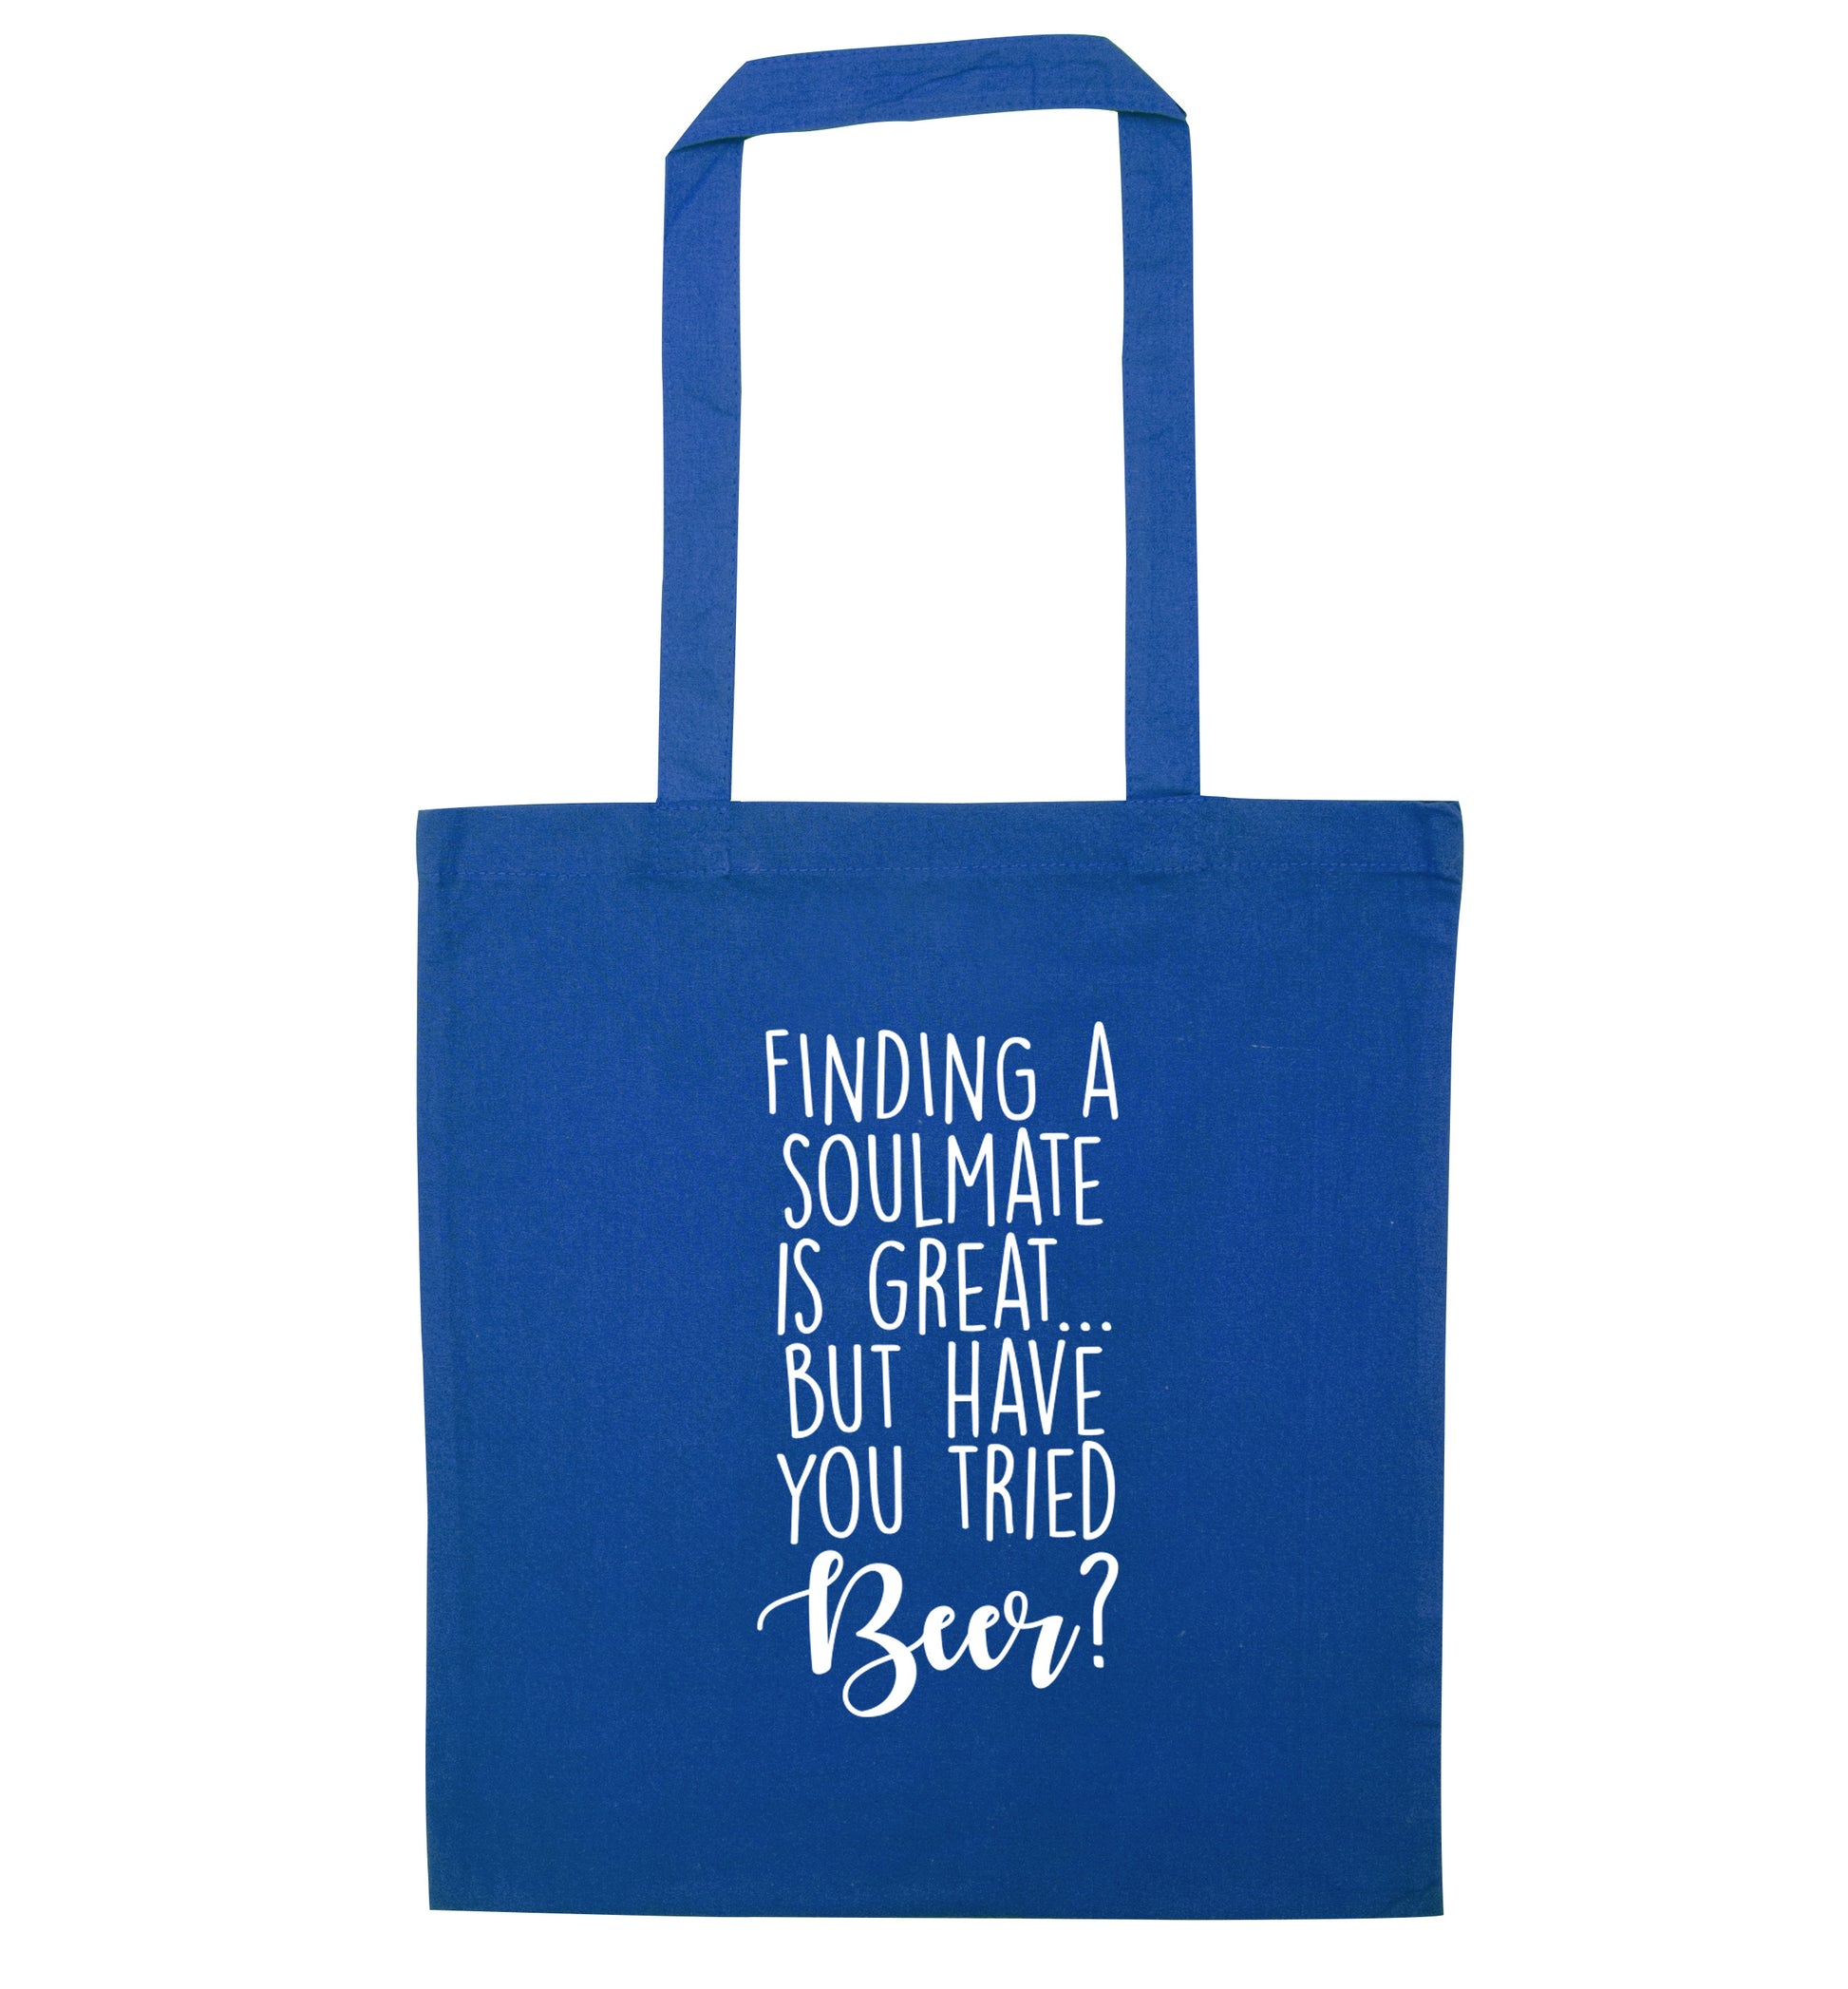 Finding a soulmate is great but have you tried beer? blue tote bag